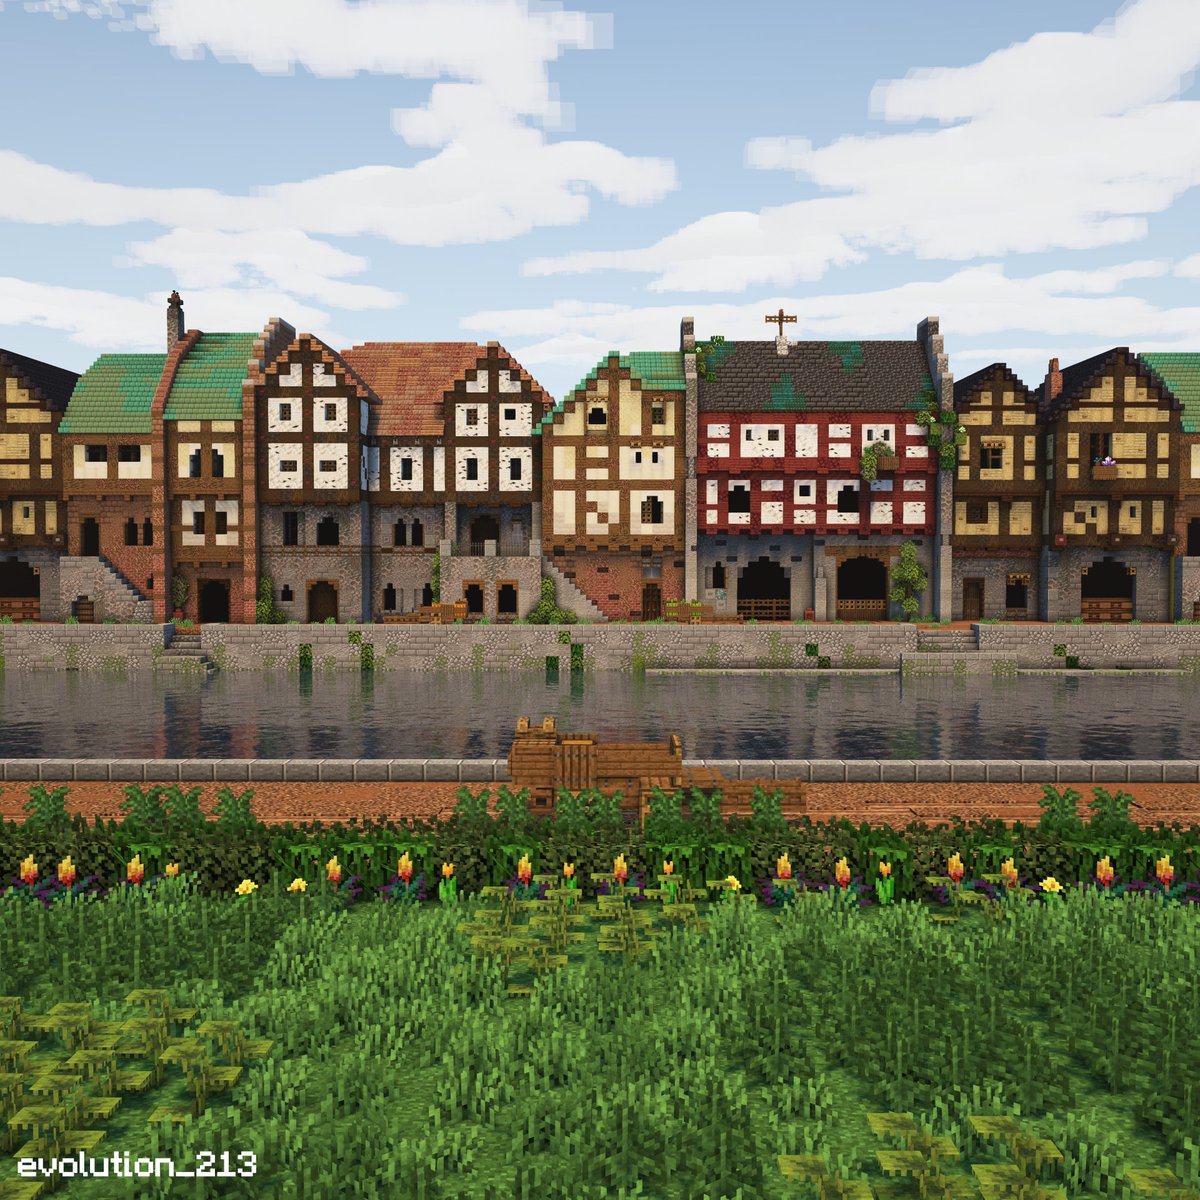 Medieval Canal Row
Old build but hoping to do a version 2 soon!
#Minecraft #minecraft建築コミュ #Minecraftbuilds